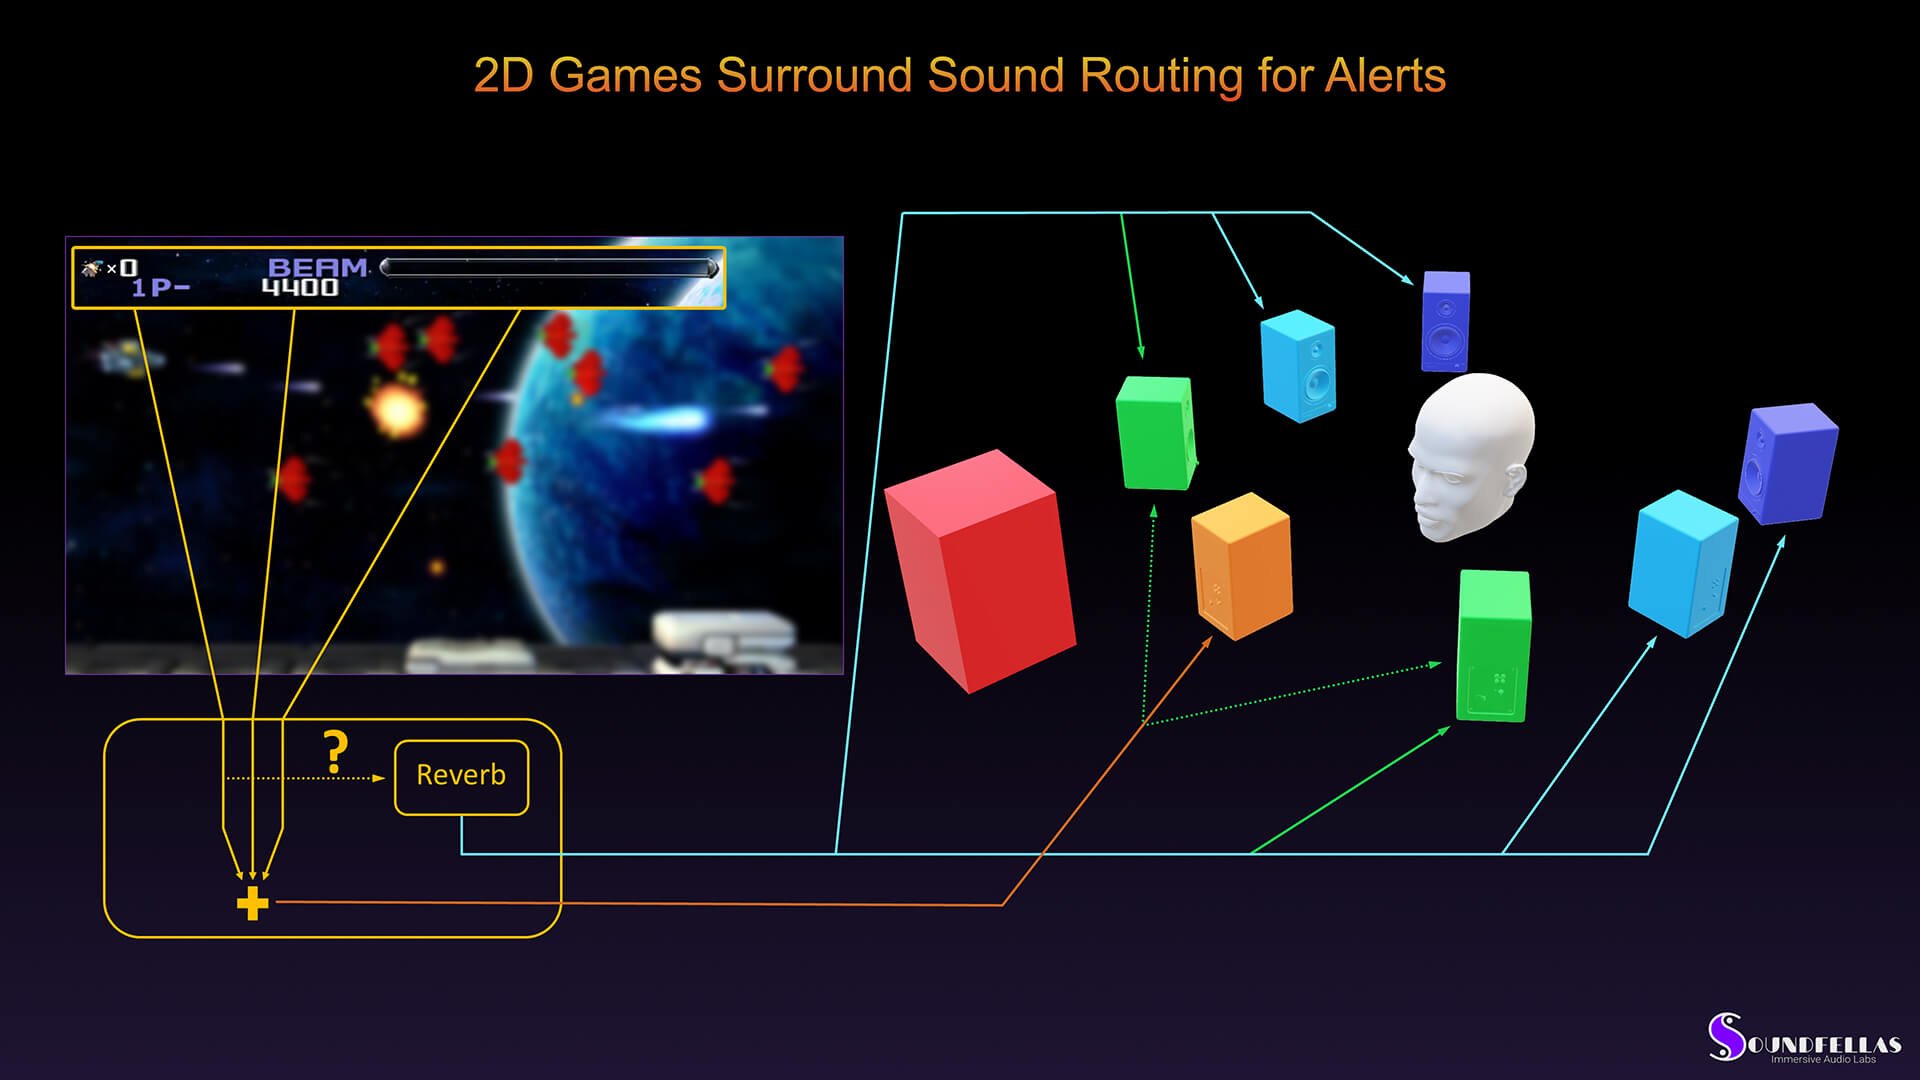 Image of 2D game surround sound routing for alerts.